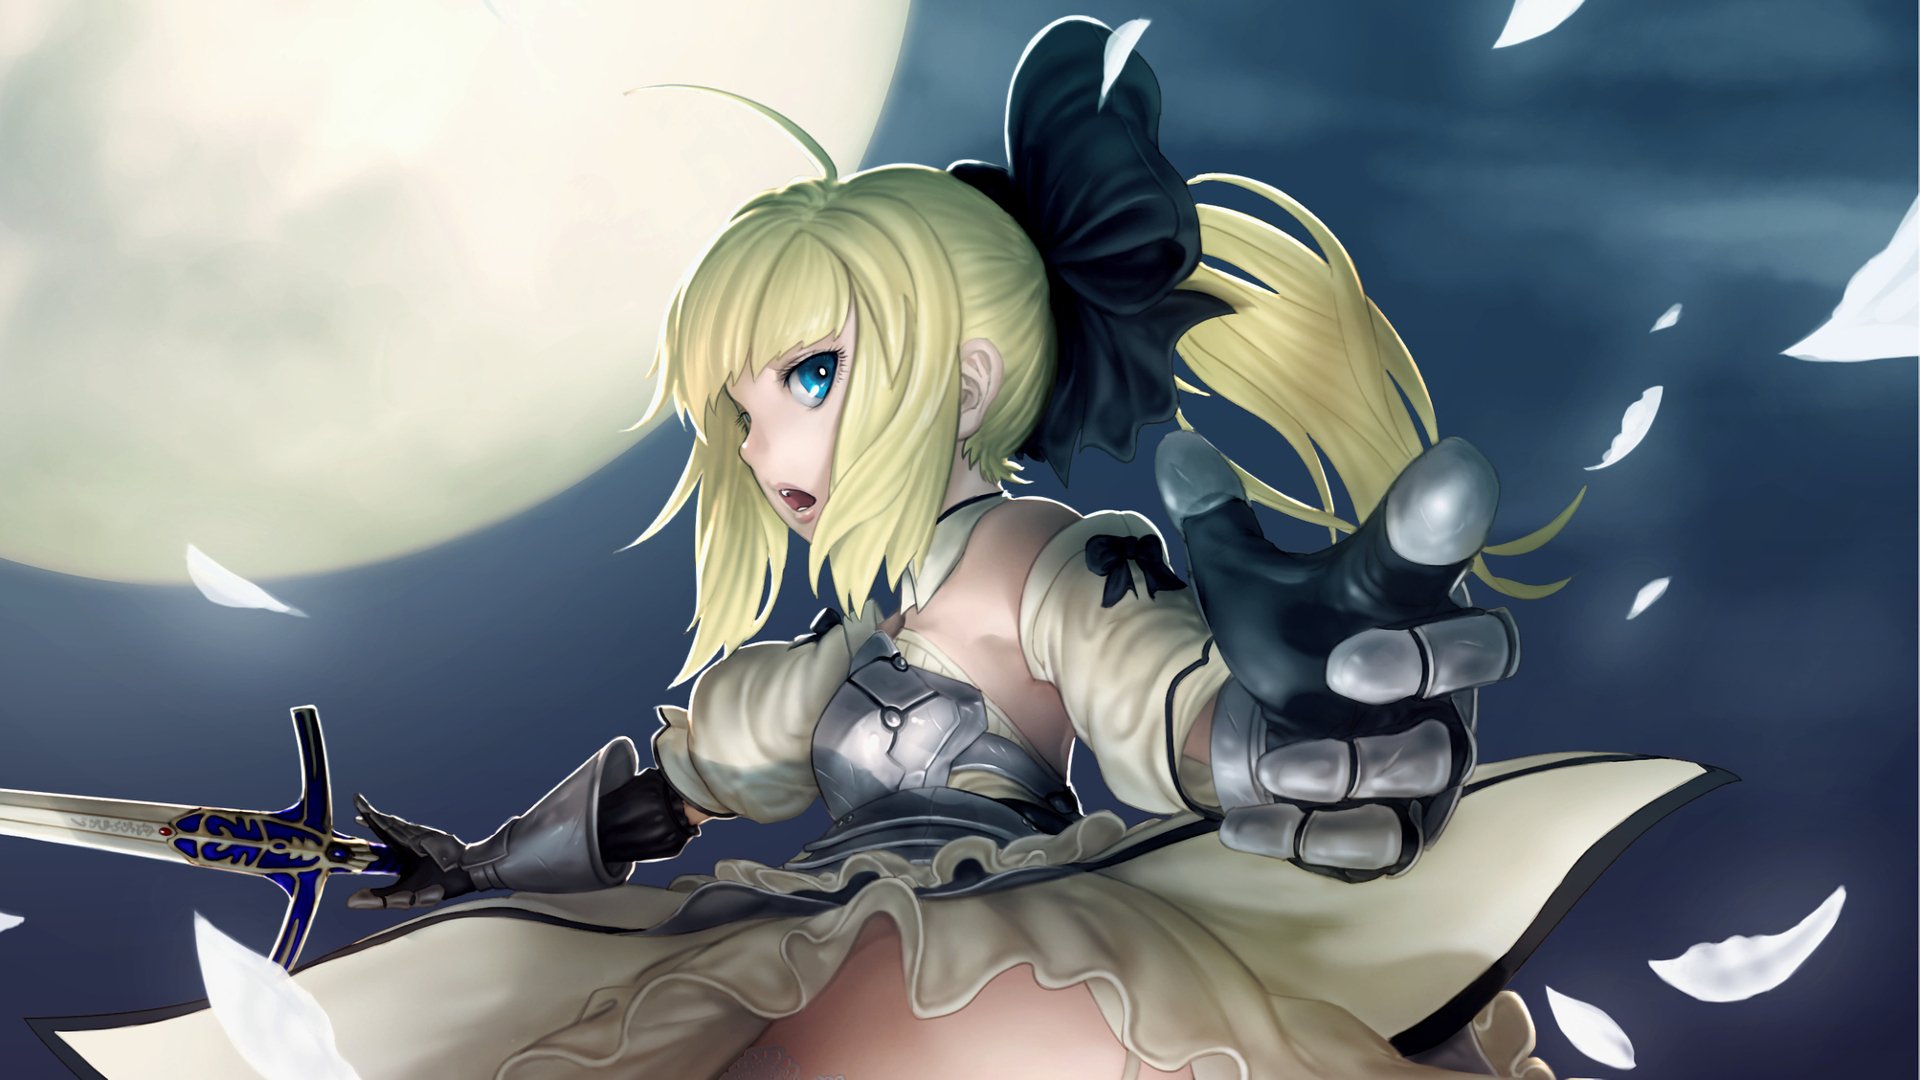 Download Saber Lily Anime Fate/Stay Night HD Wallpaper by Juno Hur